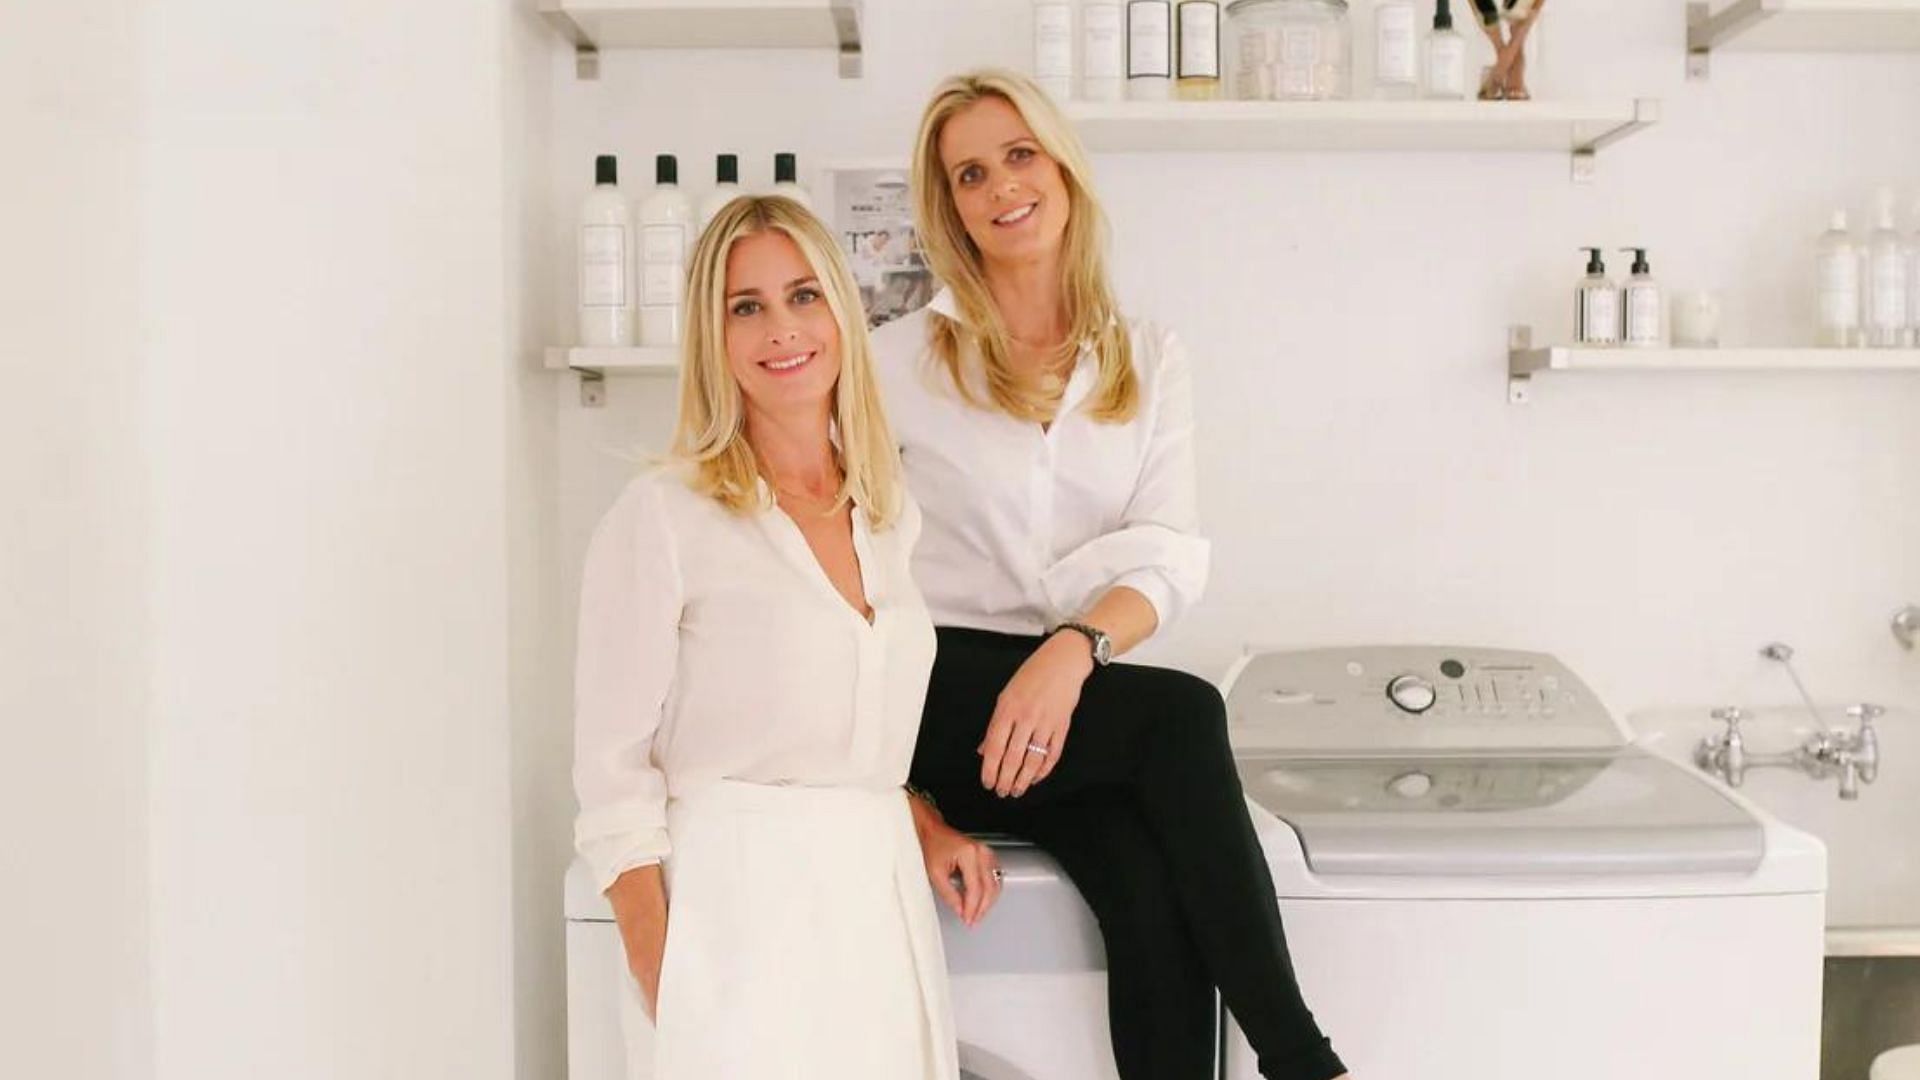 Co-founders Gwen Whiting and Lindsey Boyd, who met studying Textile &amp; Fiber Science at Cornell, wrote that they set out to revolutionize laundry on the company&rsquo;s website (Image via thelaundress.com).